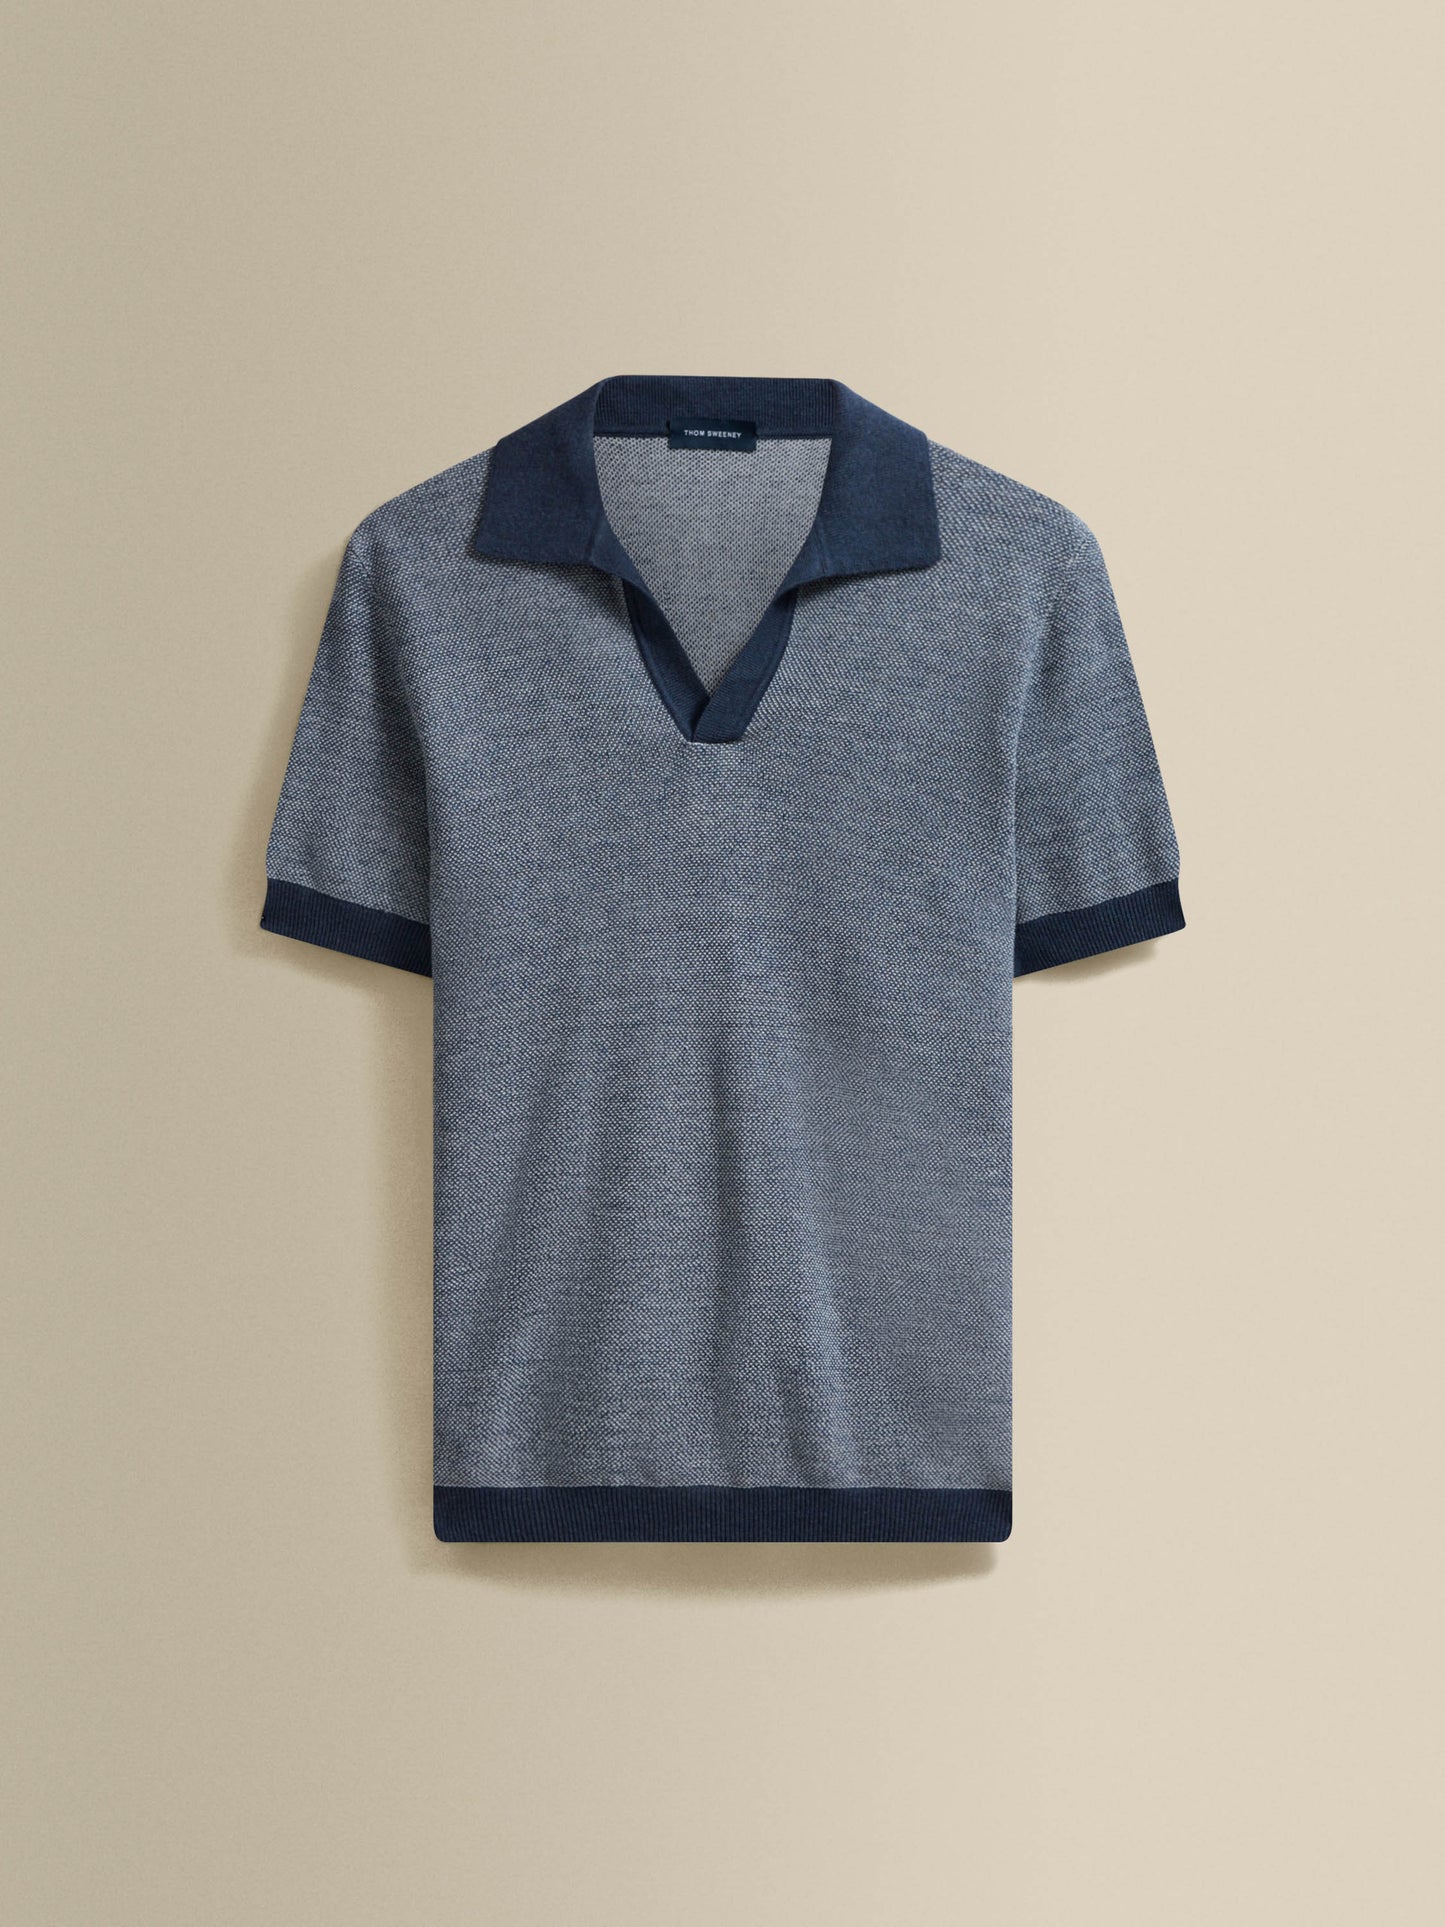 Cotton Linen Contrast Knitted Polo Shirt Dark Navy Product Image